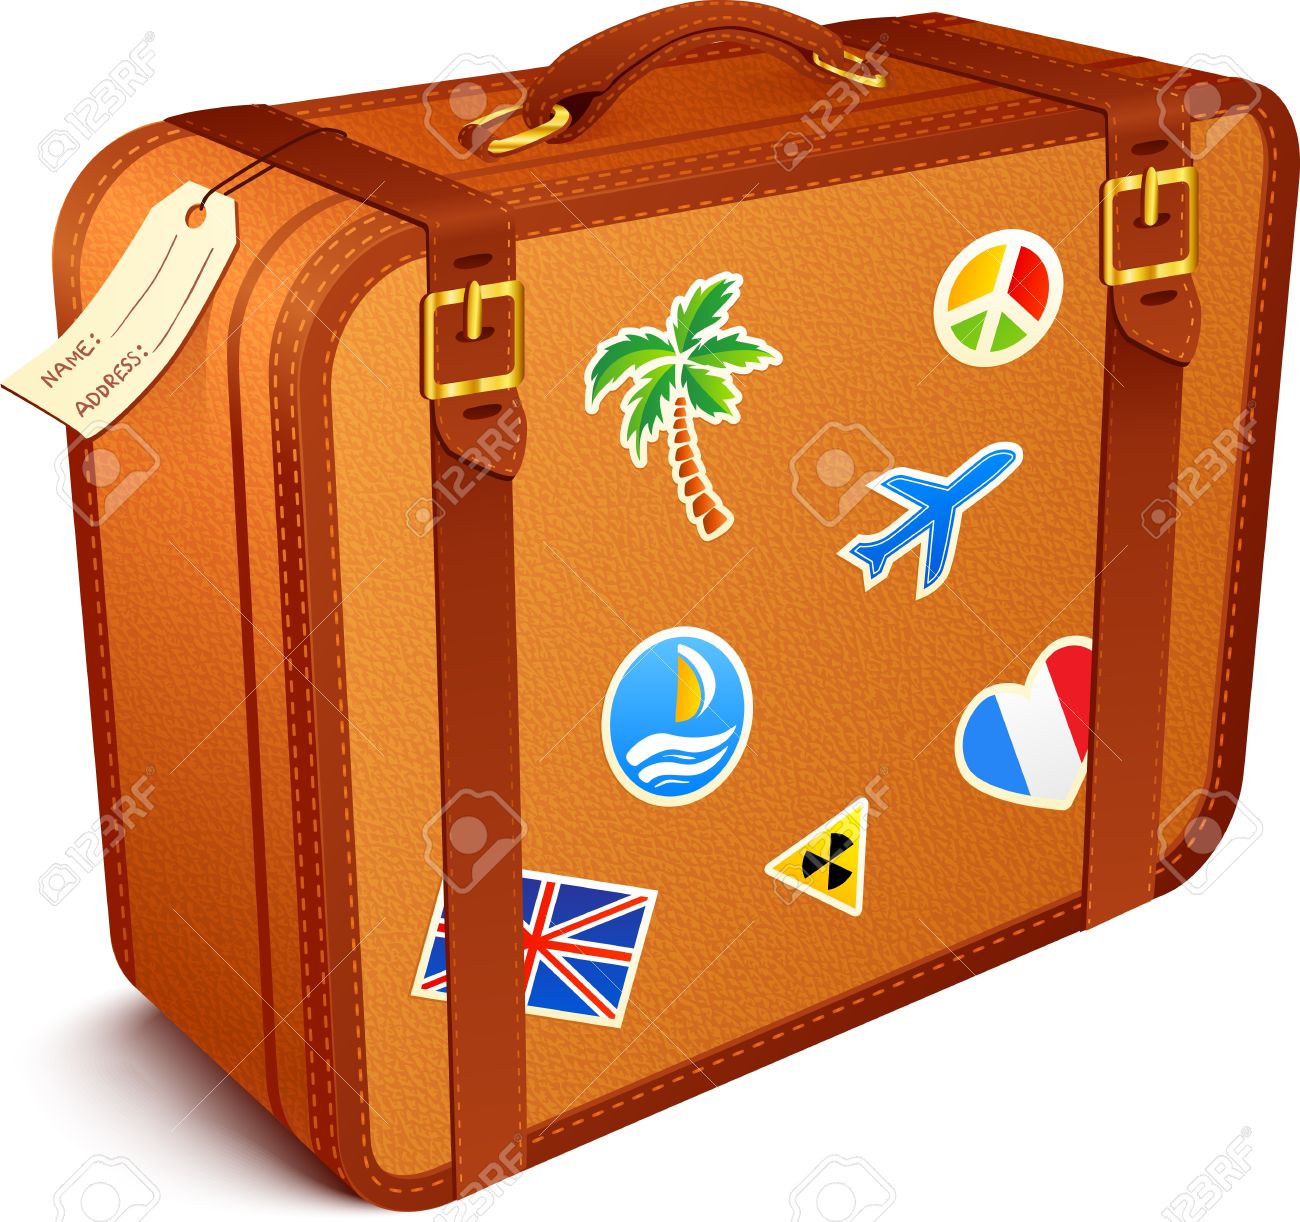 Packing Luggage Clipart. Blue